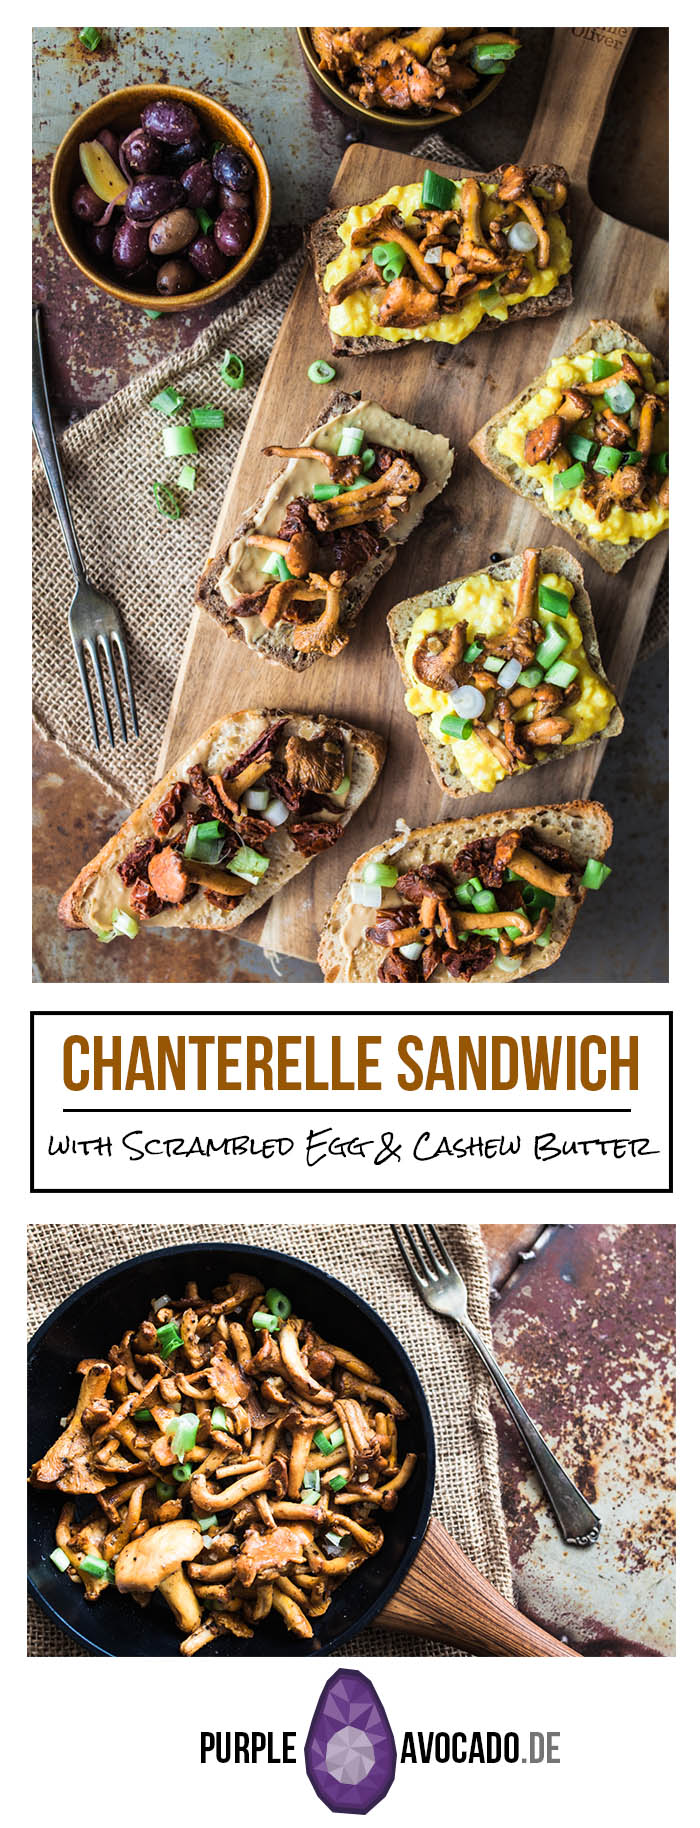 For breakfast, brunch or lunch – Those chanterelle sandwiches with scrambled egg, dried tomatoes and cashew butter surely will satisfy your tastebuds with a variety of tastes and textures. 